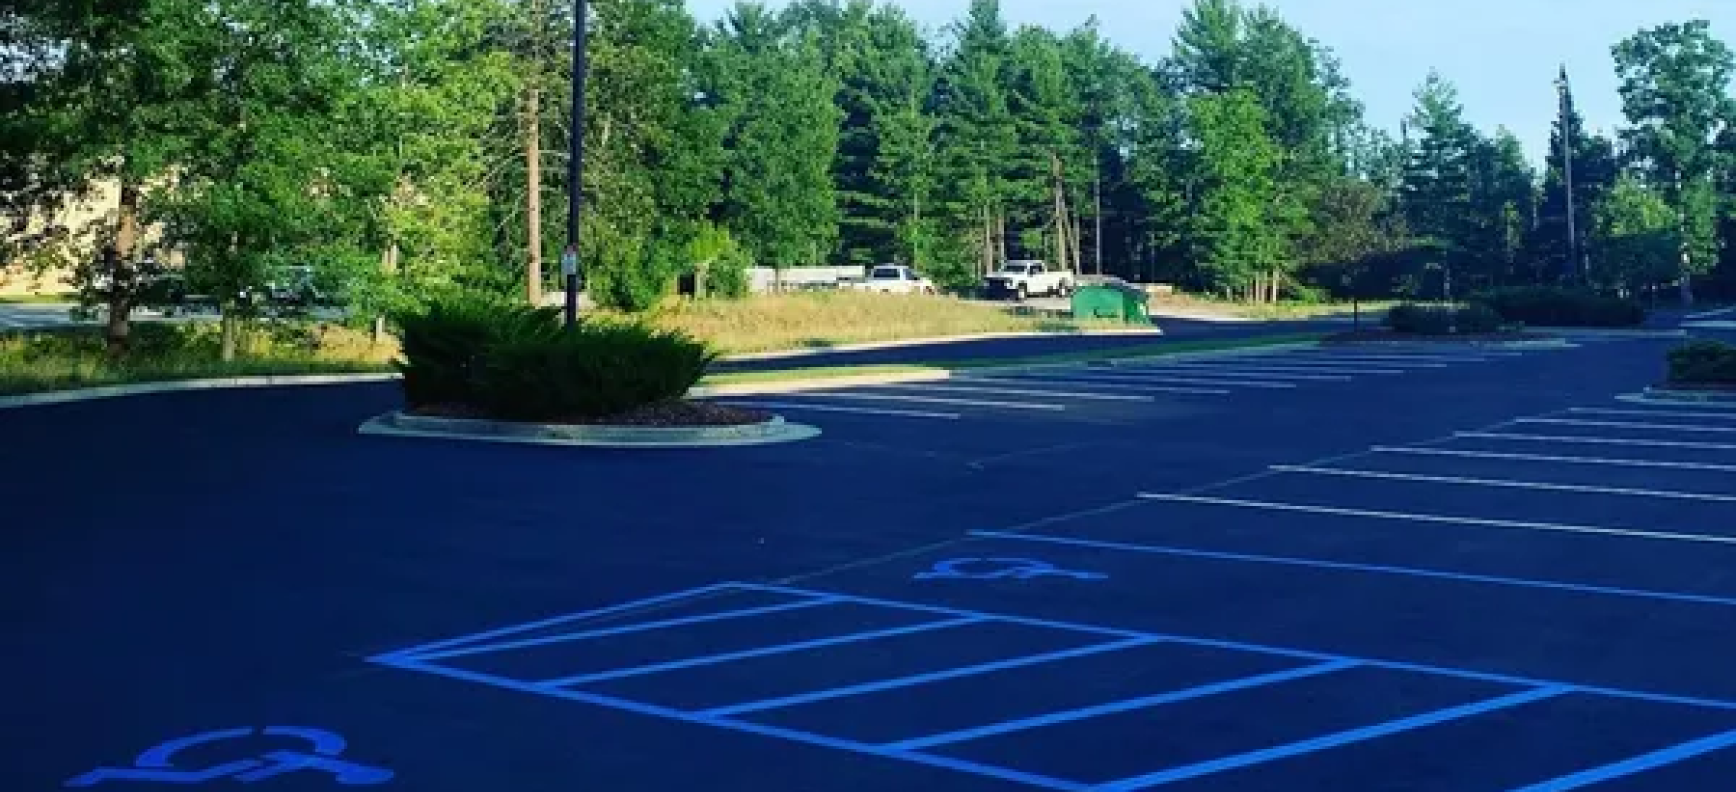 Professional Parking Lot Striping Services for Safe and Organized Traffic Flow in Traverse City, Michigan